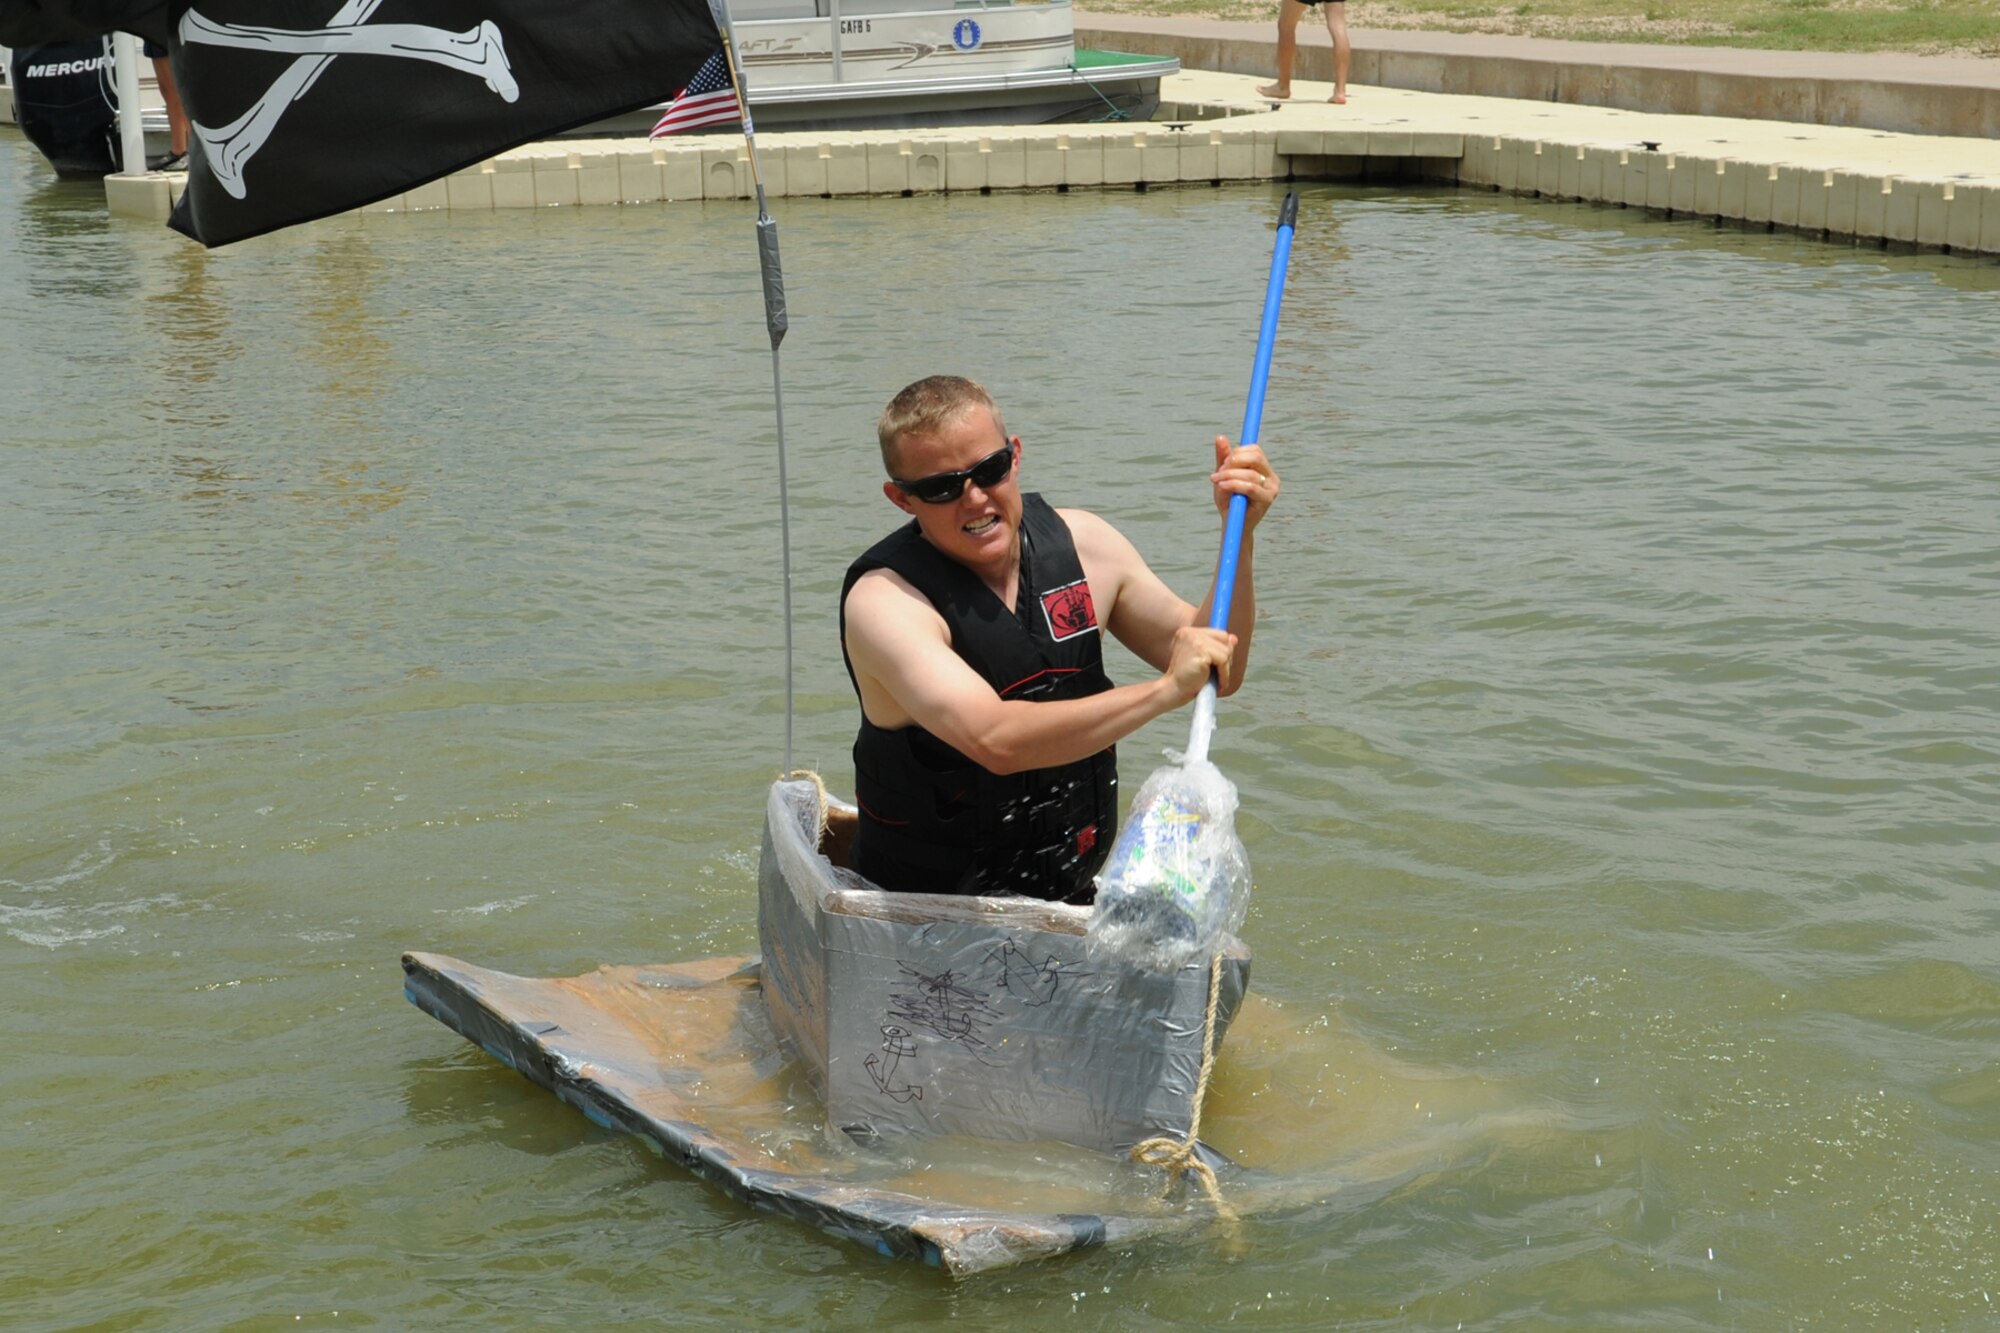 GOODFELLOW AIR FORCE BASE, Texas -- Navy Chief Petty Officer Joshua Roundy, Navy Center for Information Dominance Detachment, paddles to the dock during the Build a Boat contest at the Goodfellow Recreation Camp, May 27. Roundy won first place in the individual category. (U.S. Air Force photo/ Staff Sgt. Laura R. McFarlane)